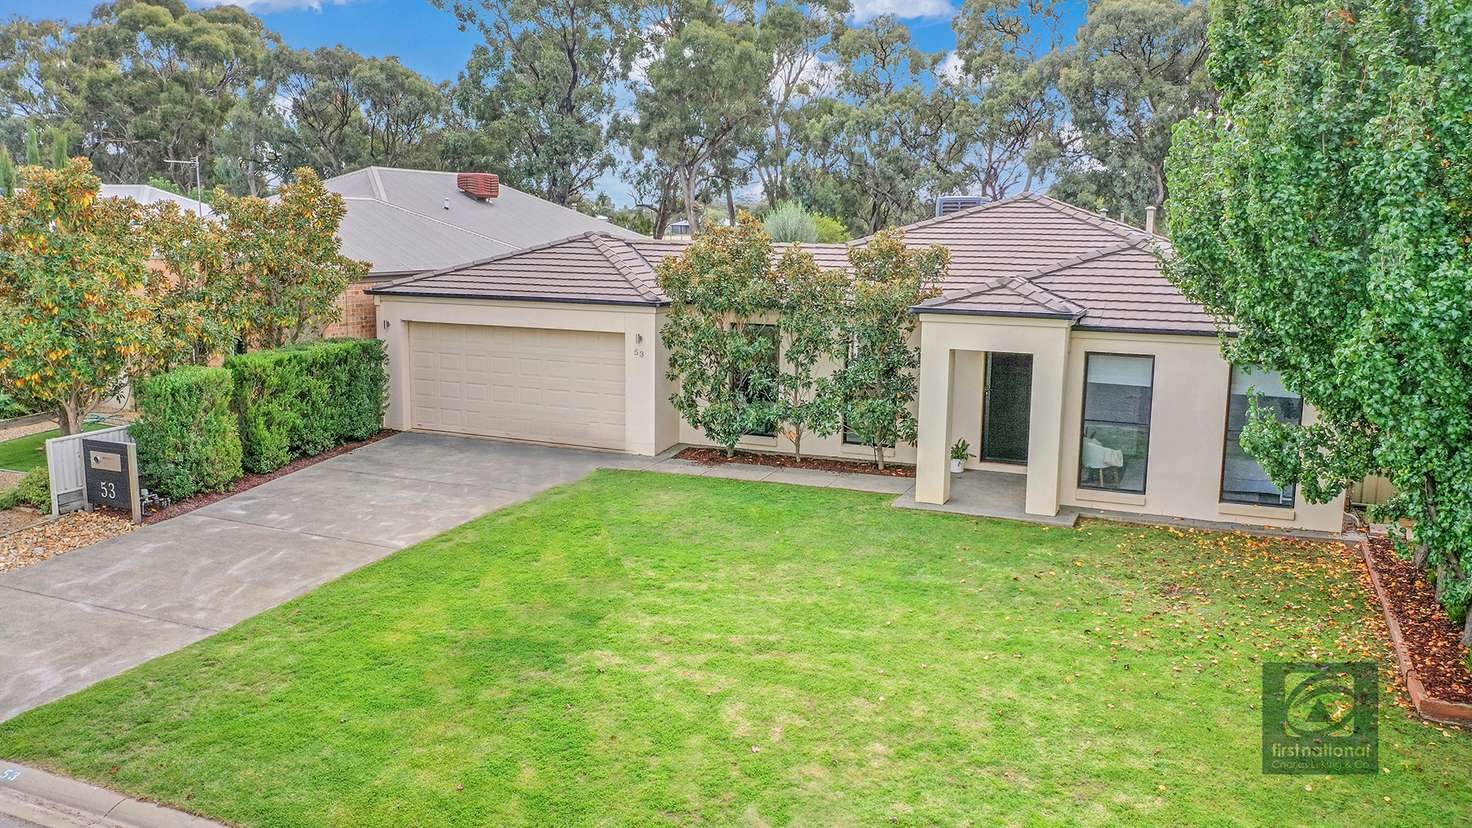 Main view of Homely house listing, 53 Shetland Drive, Moama NSW 2731